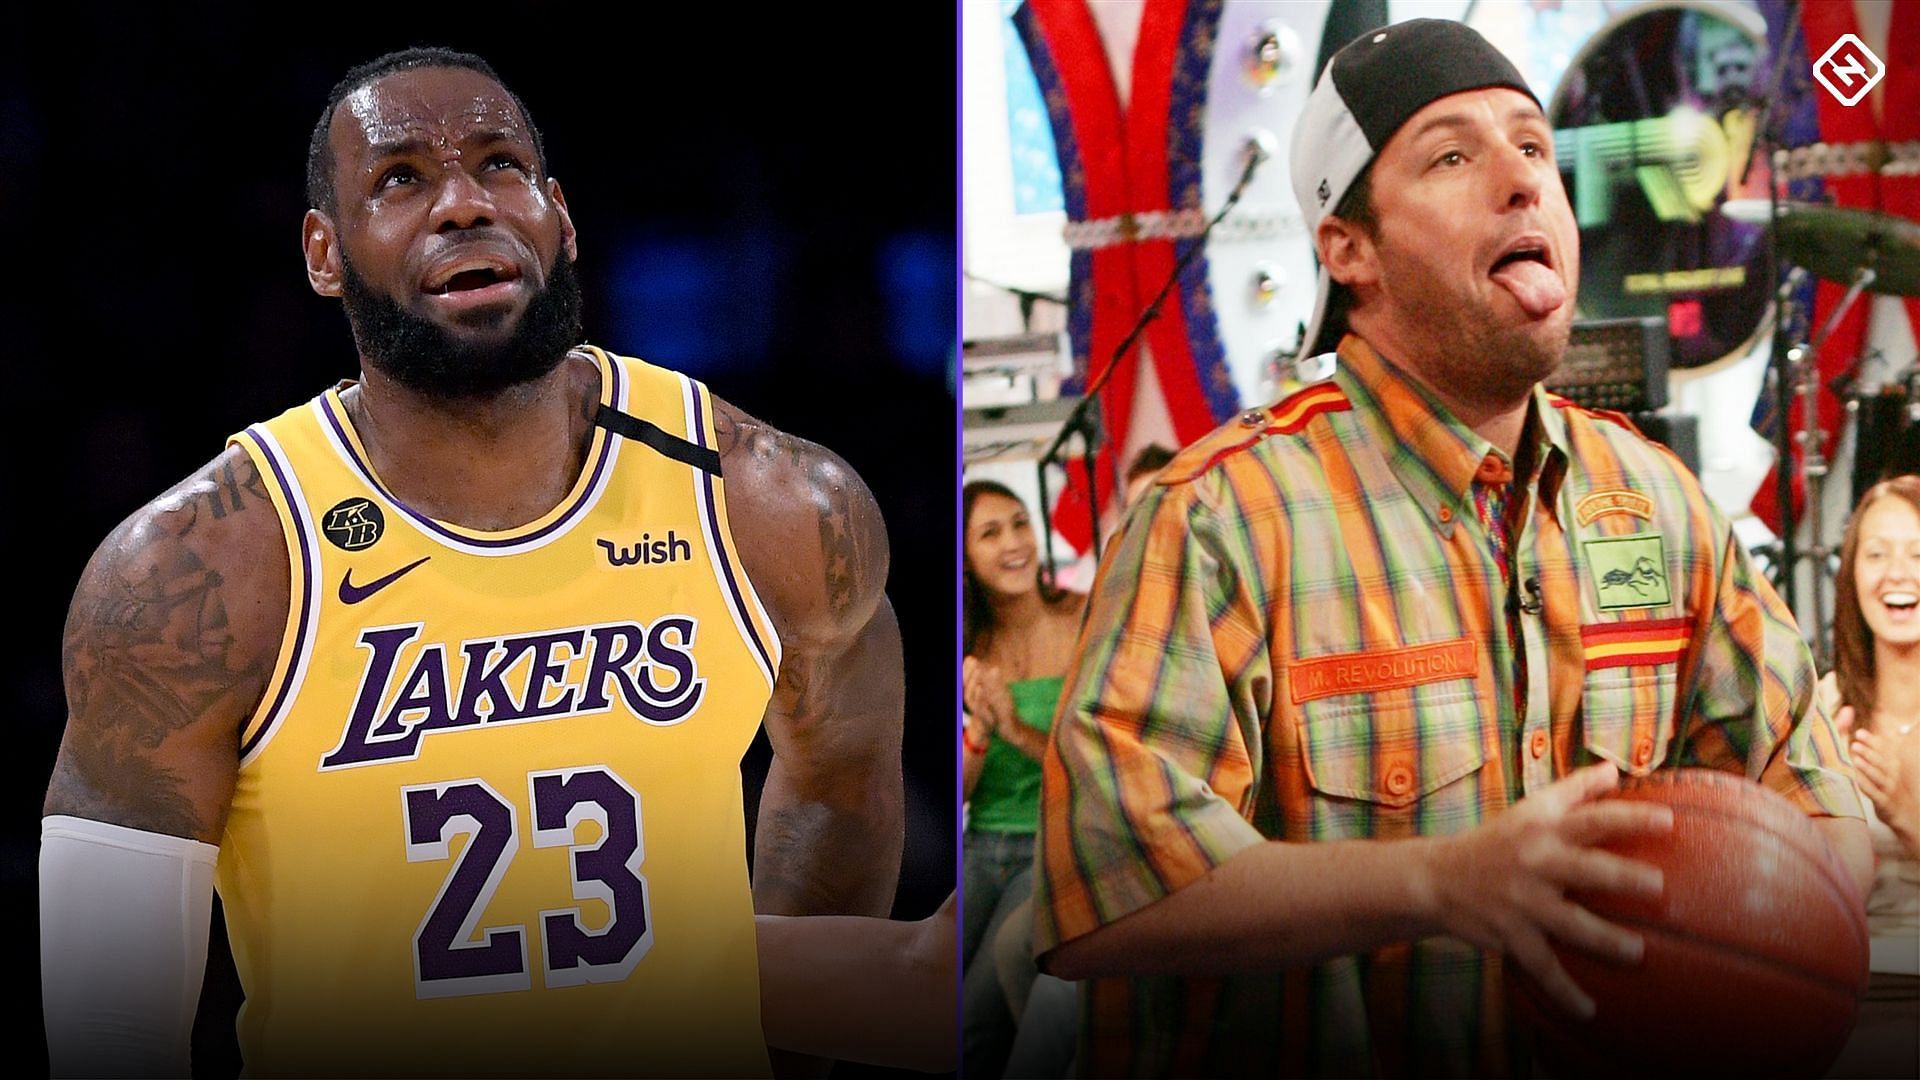 The movie Hustle will be co-produced by LeBron James and Adam Sandler [Photo: Sporting News]